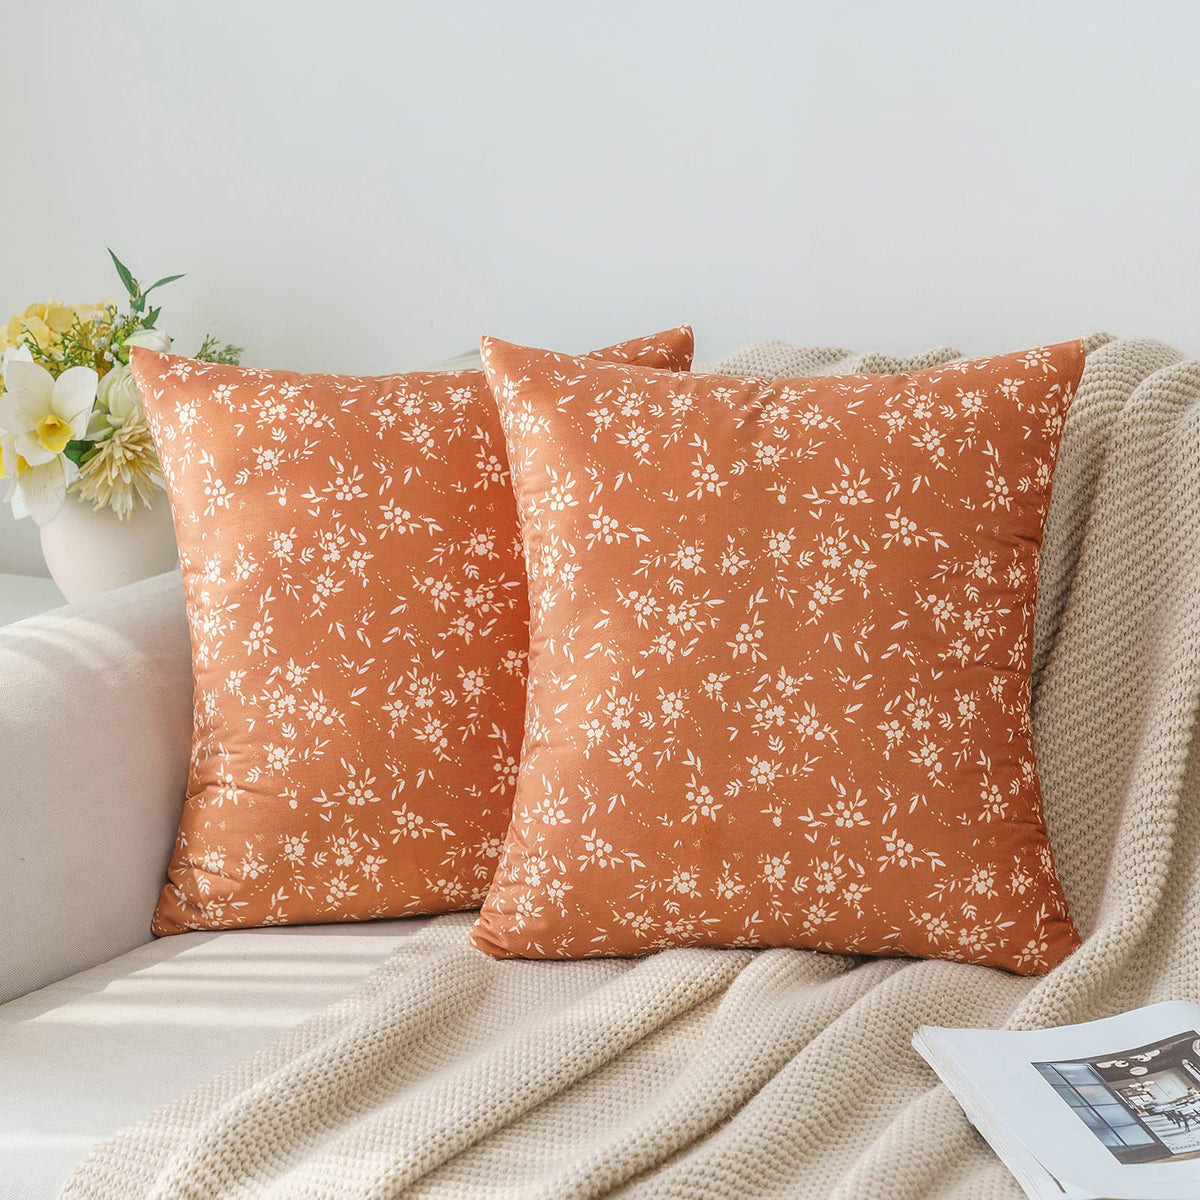 KWLET Pillow Covers 18x18 Inch Spring Summer Flower Boho Decorative Pillow  Covers Linen Cushion Cover Home Decor Orange Pink Flowers Throw Pillows Set